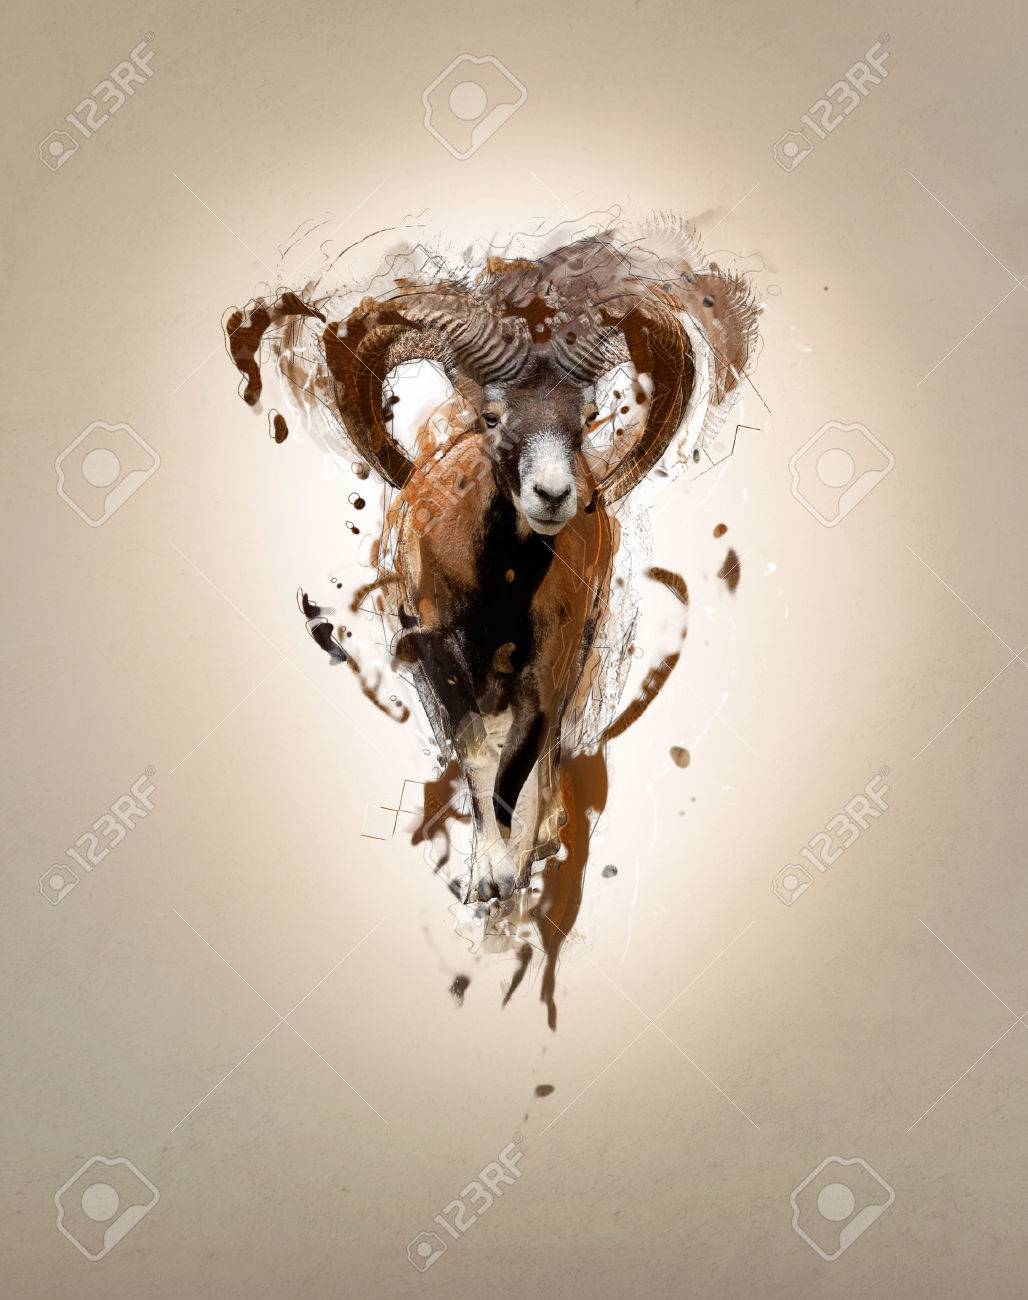 Mouflon Abstract Animal Concept Stock Photo Picture And Royalty